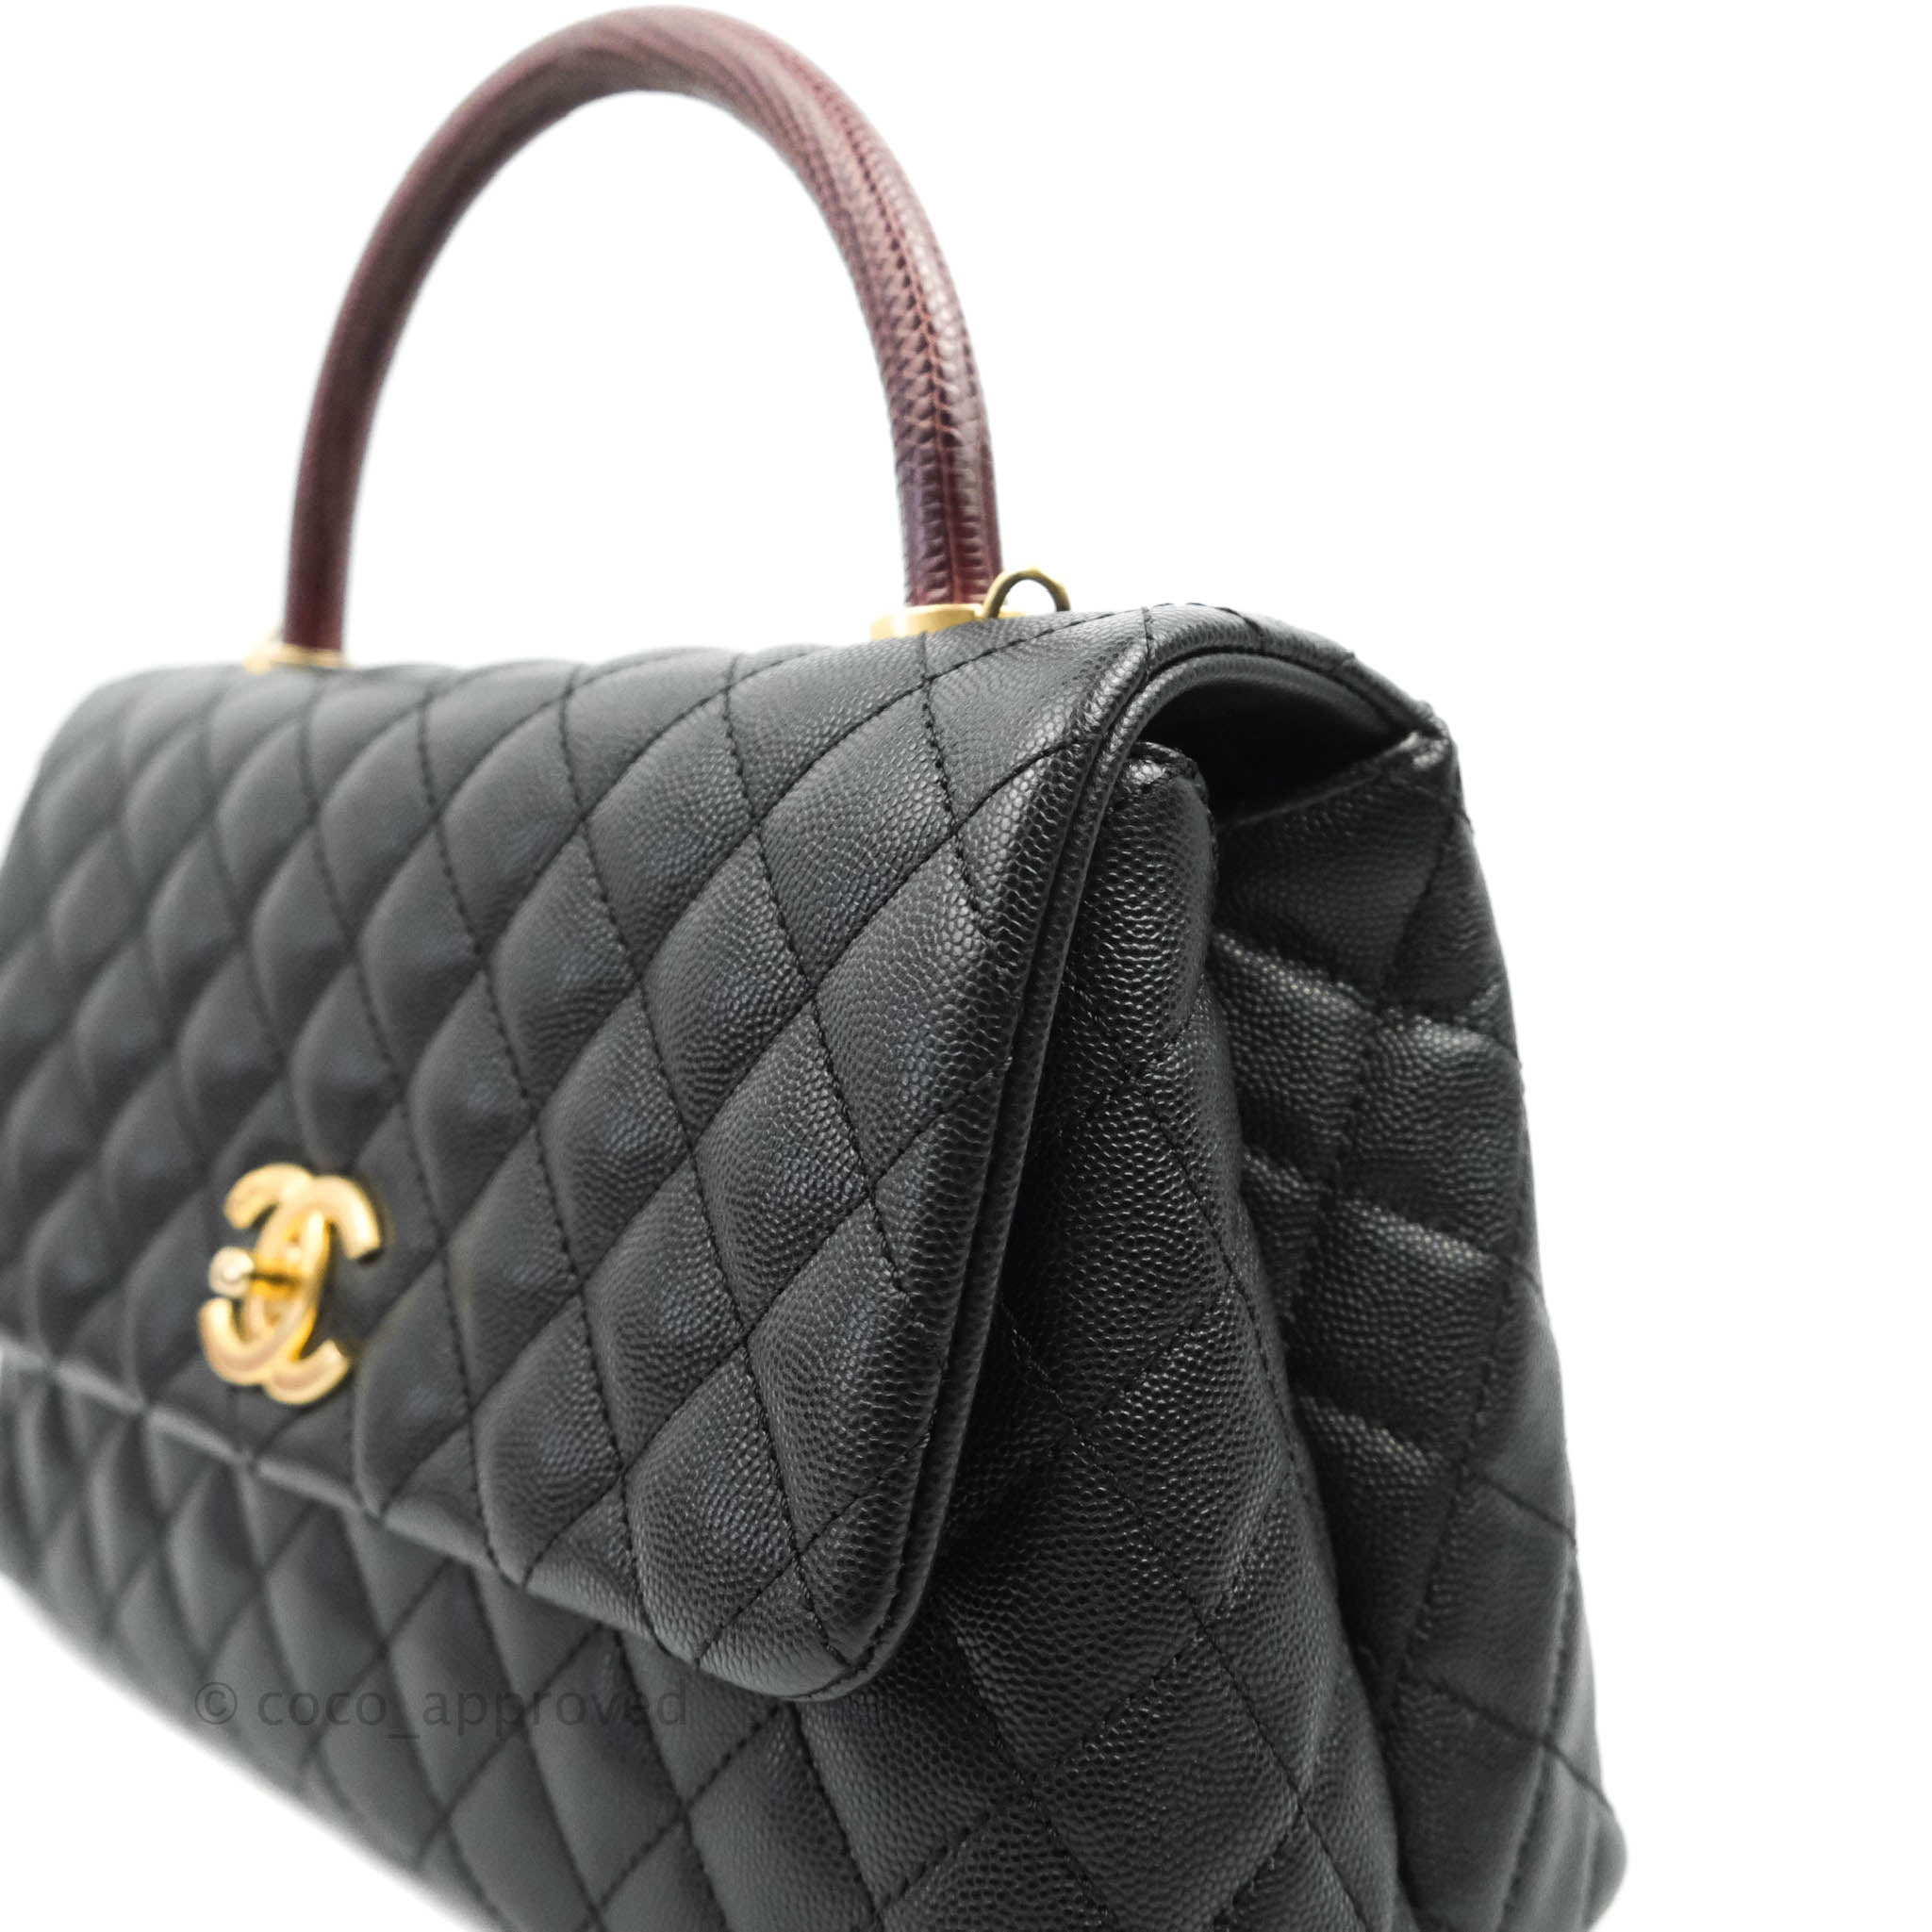 $5900 Chanel Coco Handle red quilted Caviar Small bag lizard handle gold hw